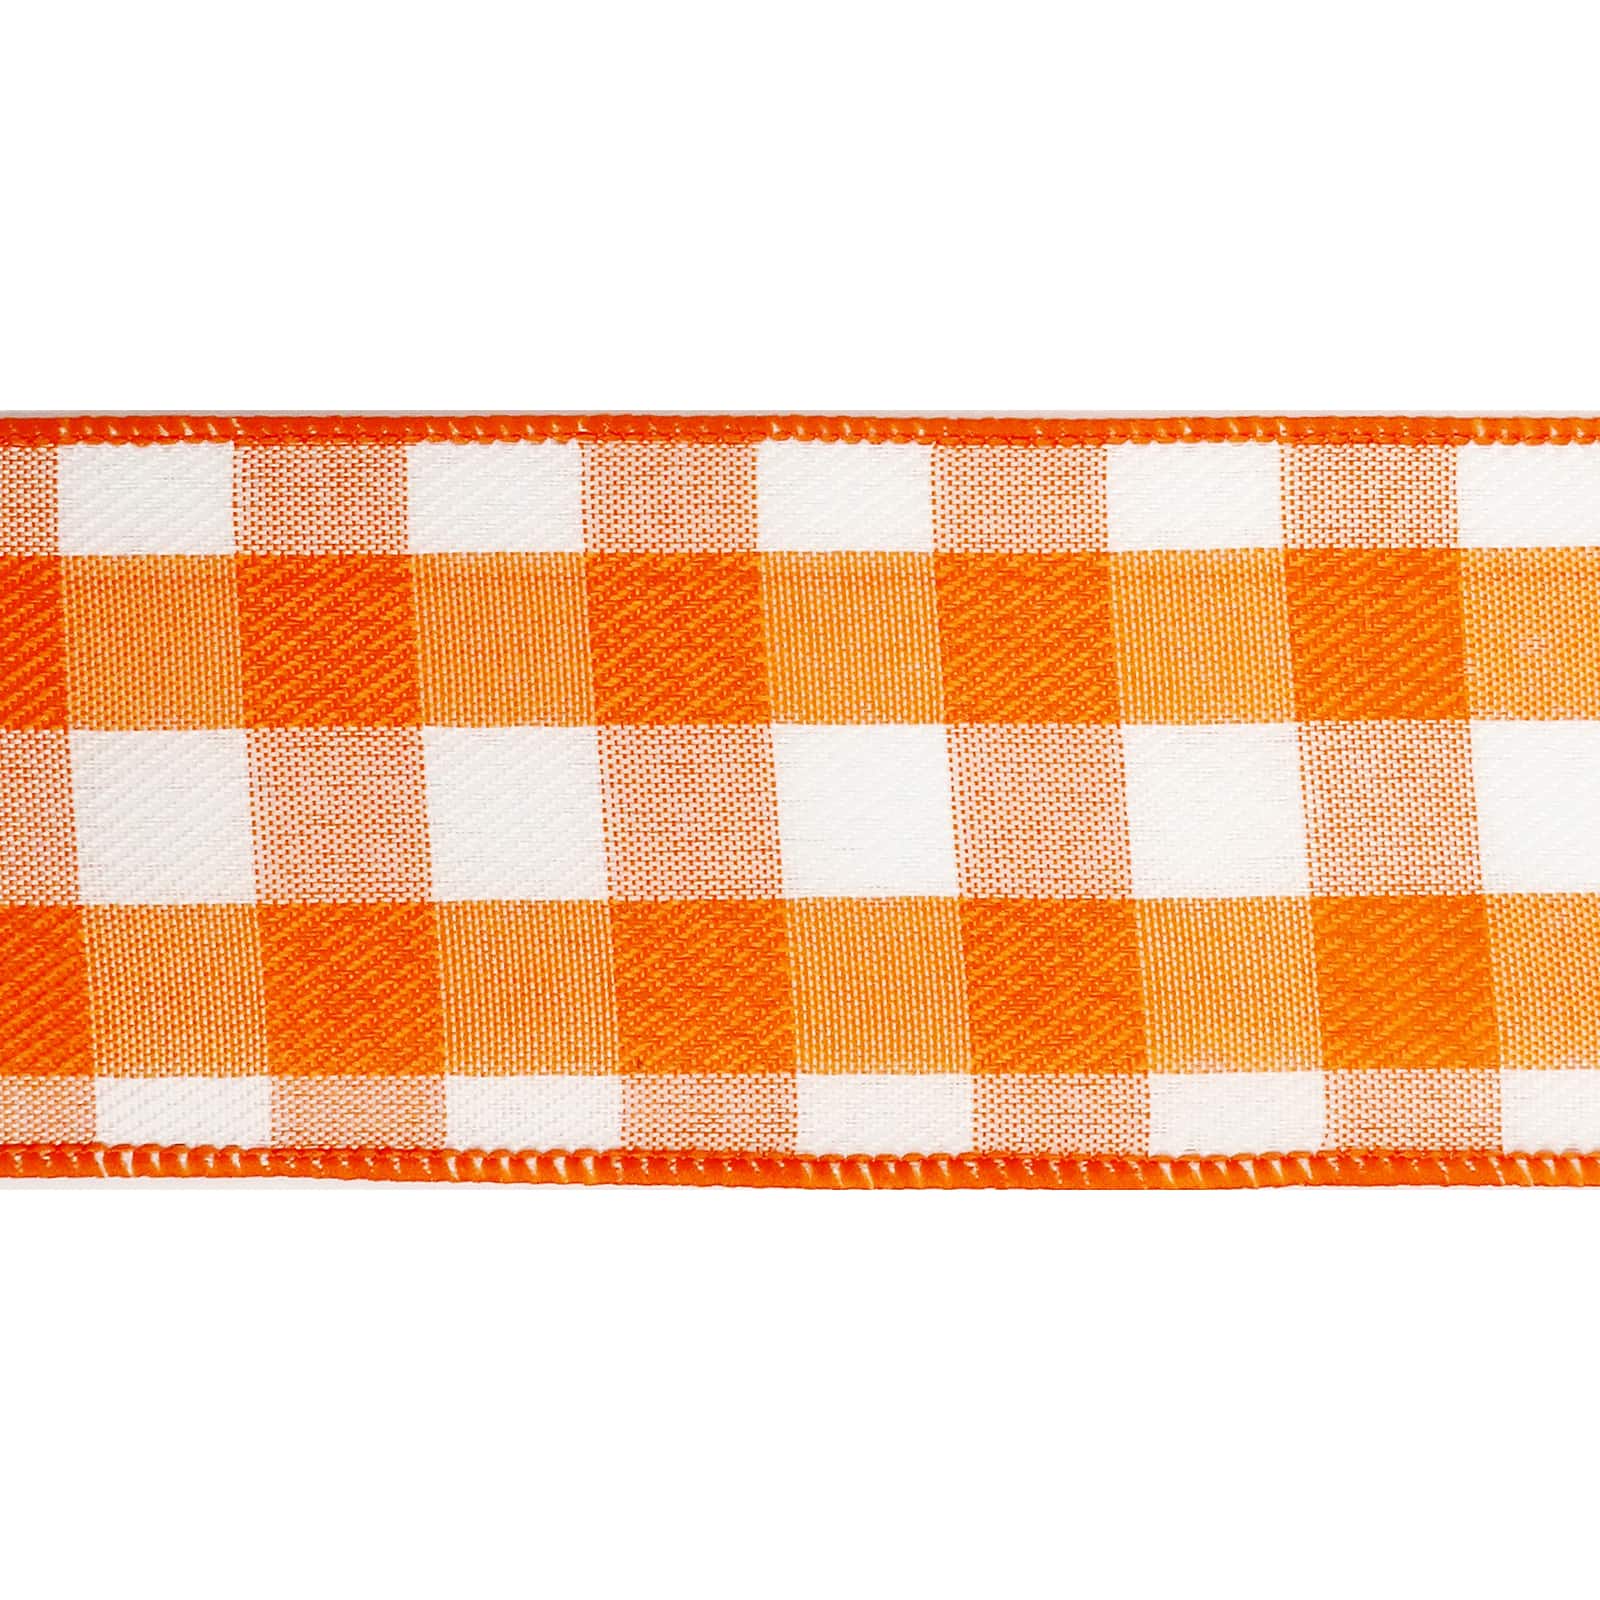 2.5&#x22; x 8.3yd. Wired Gingham Ribbon by Celebrate It&#x2122; D&#xE9;cor